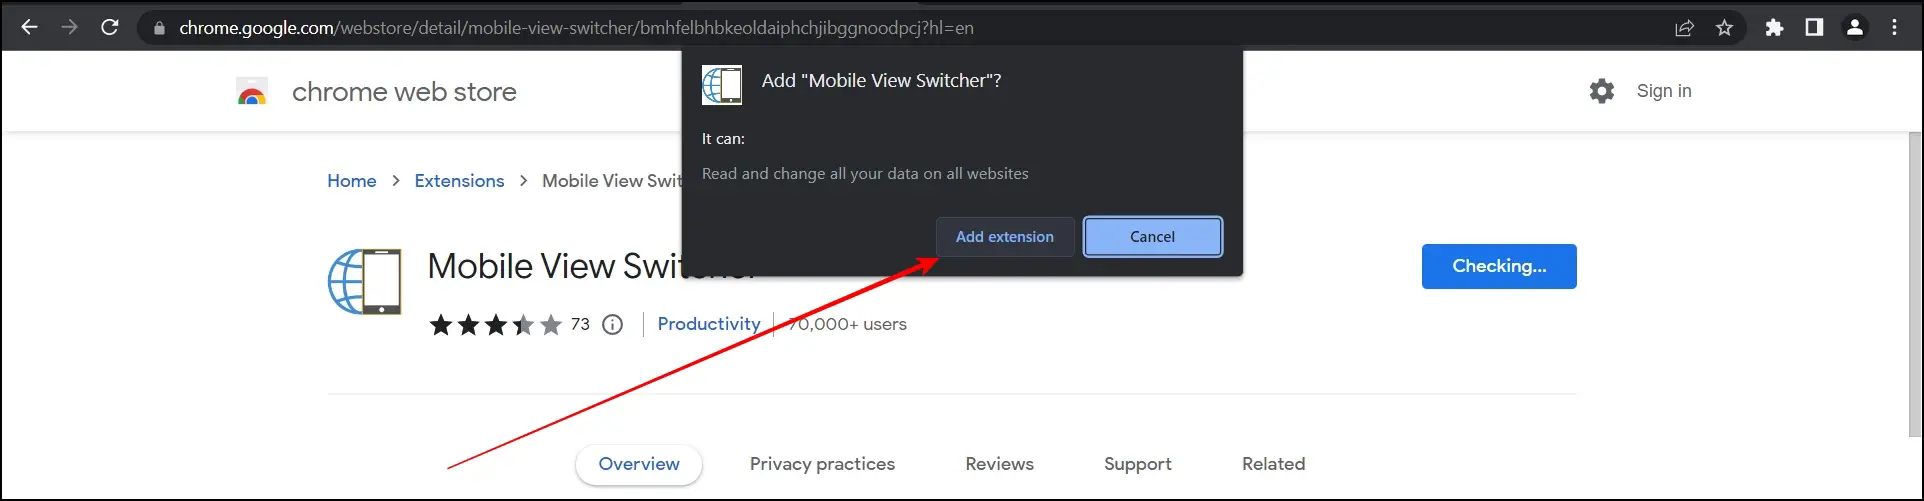 Mobile View Switcher Extension